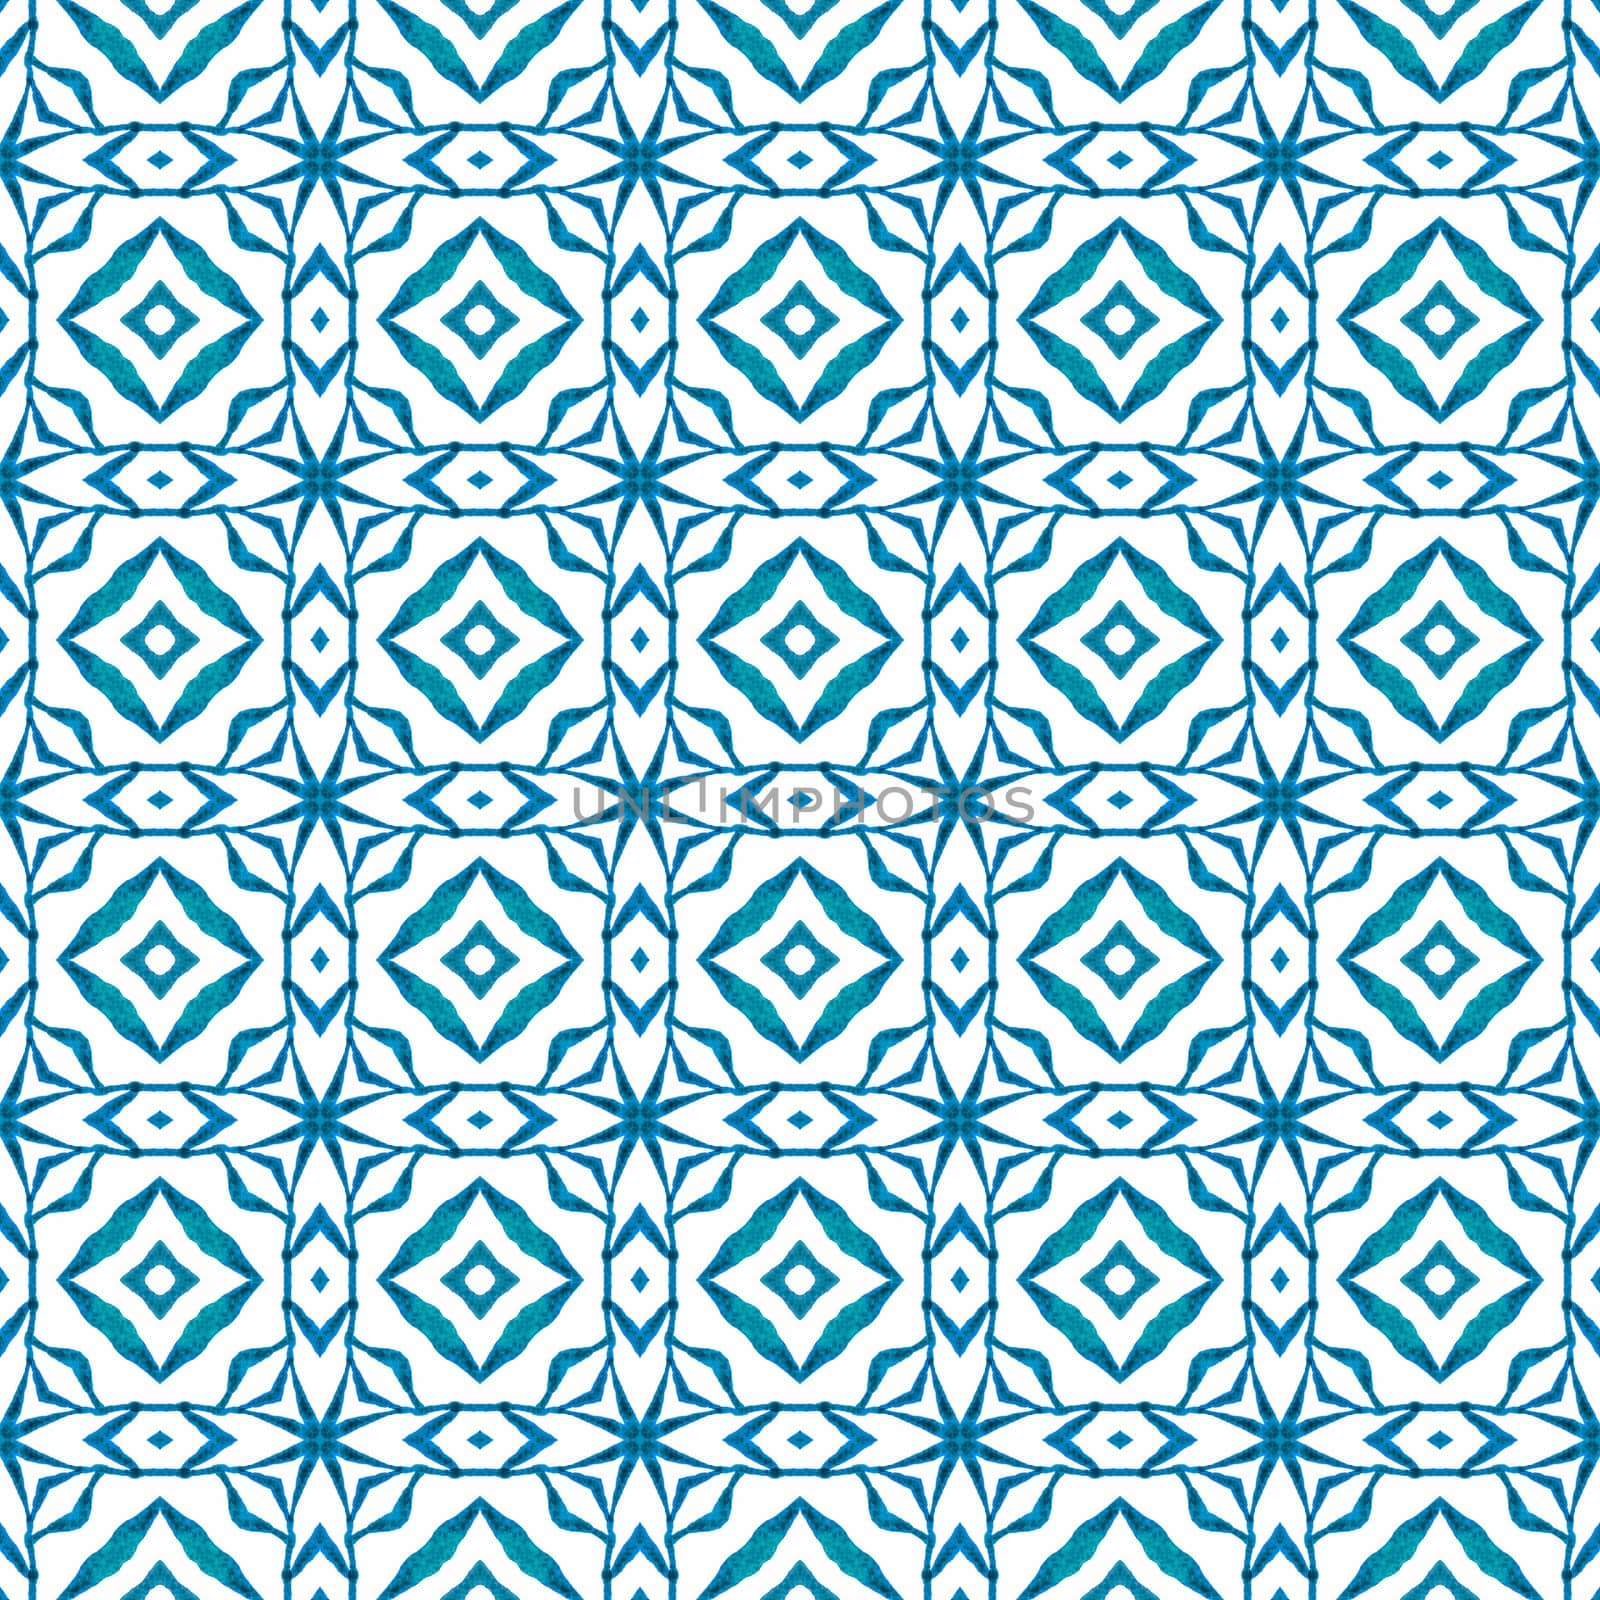 Textile ready delightful print, swimwear fabric, wallpaper, wrapping. Blue beautiful boho chic summer design. Hand painted tiled watercolor border. Tiled watercolor background.